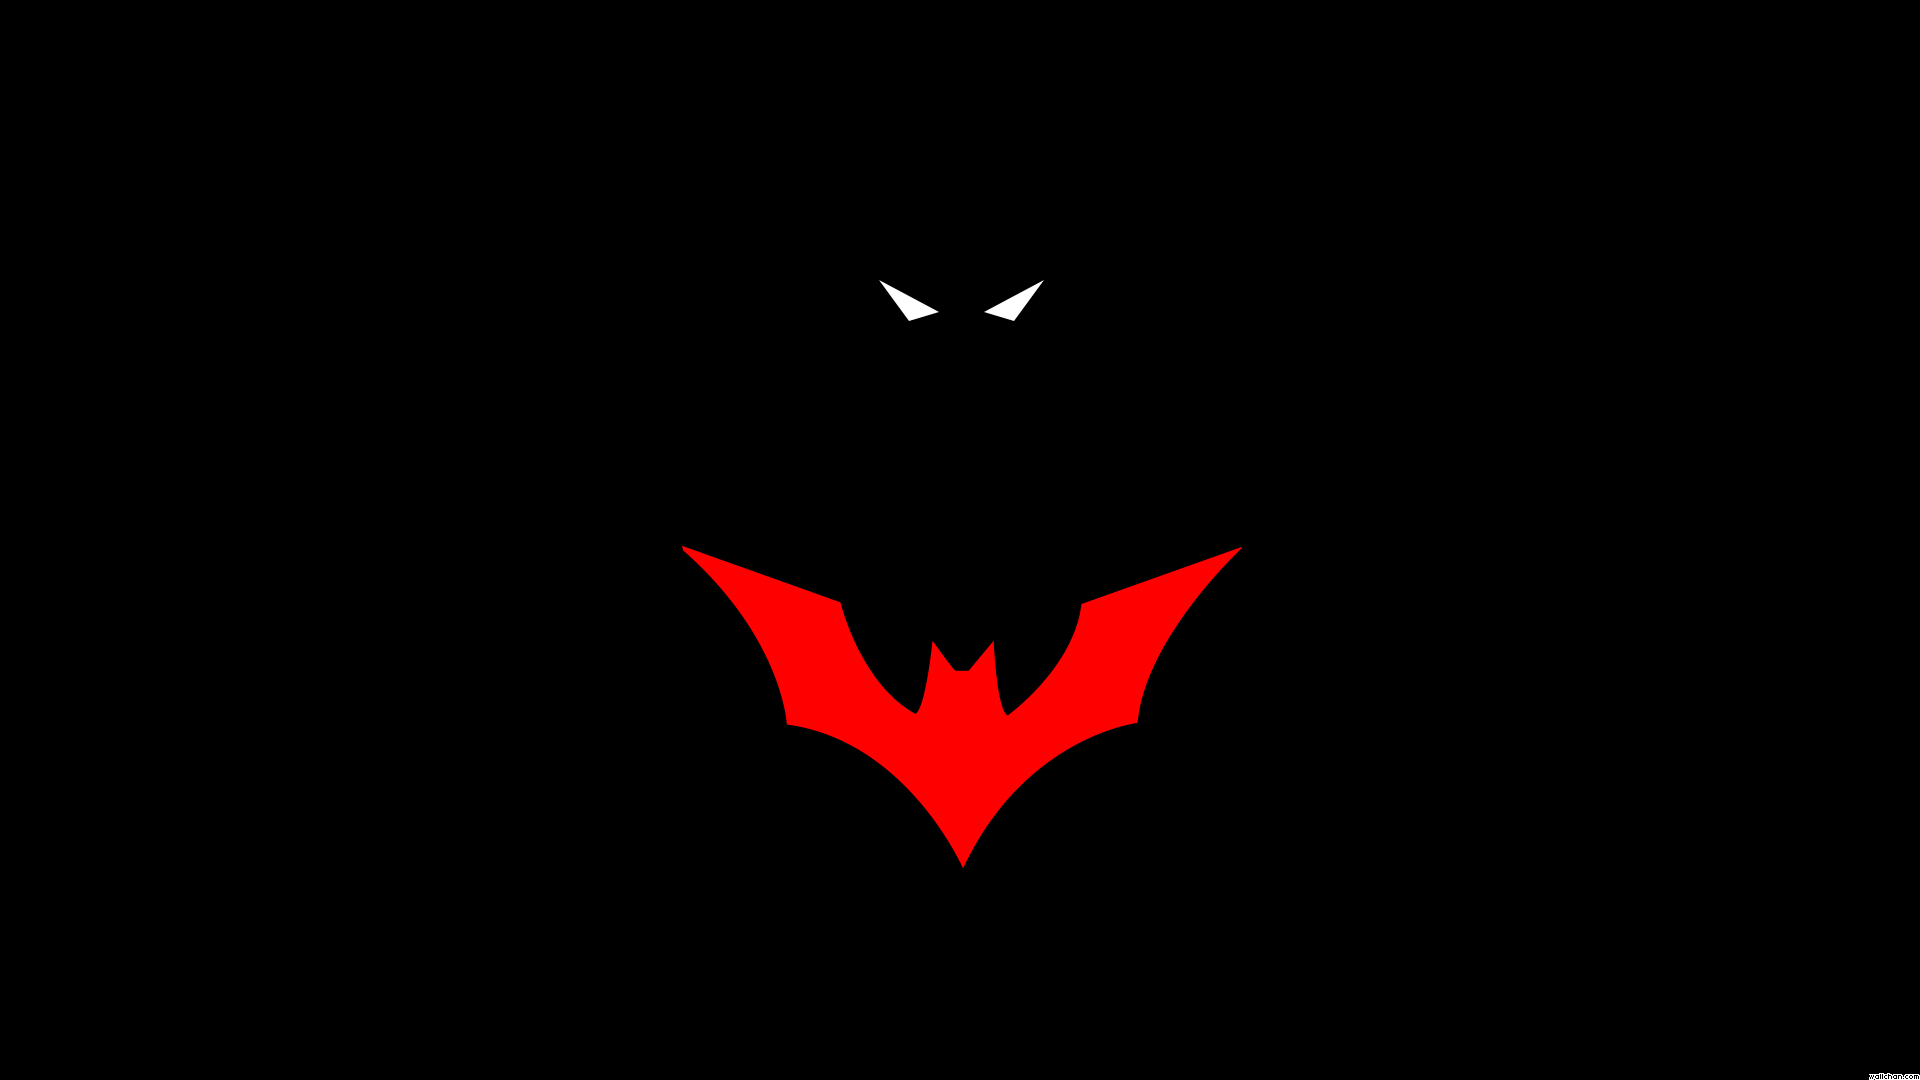 Black Bat wallpapers for desktop download free Black Bat pictures and  backgrounds for PC  moborg